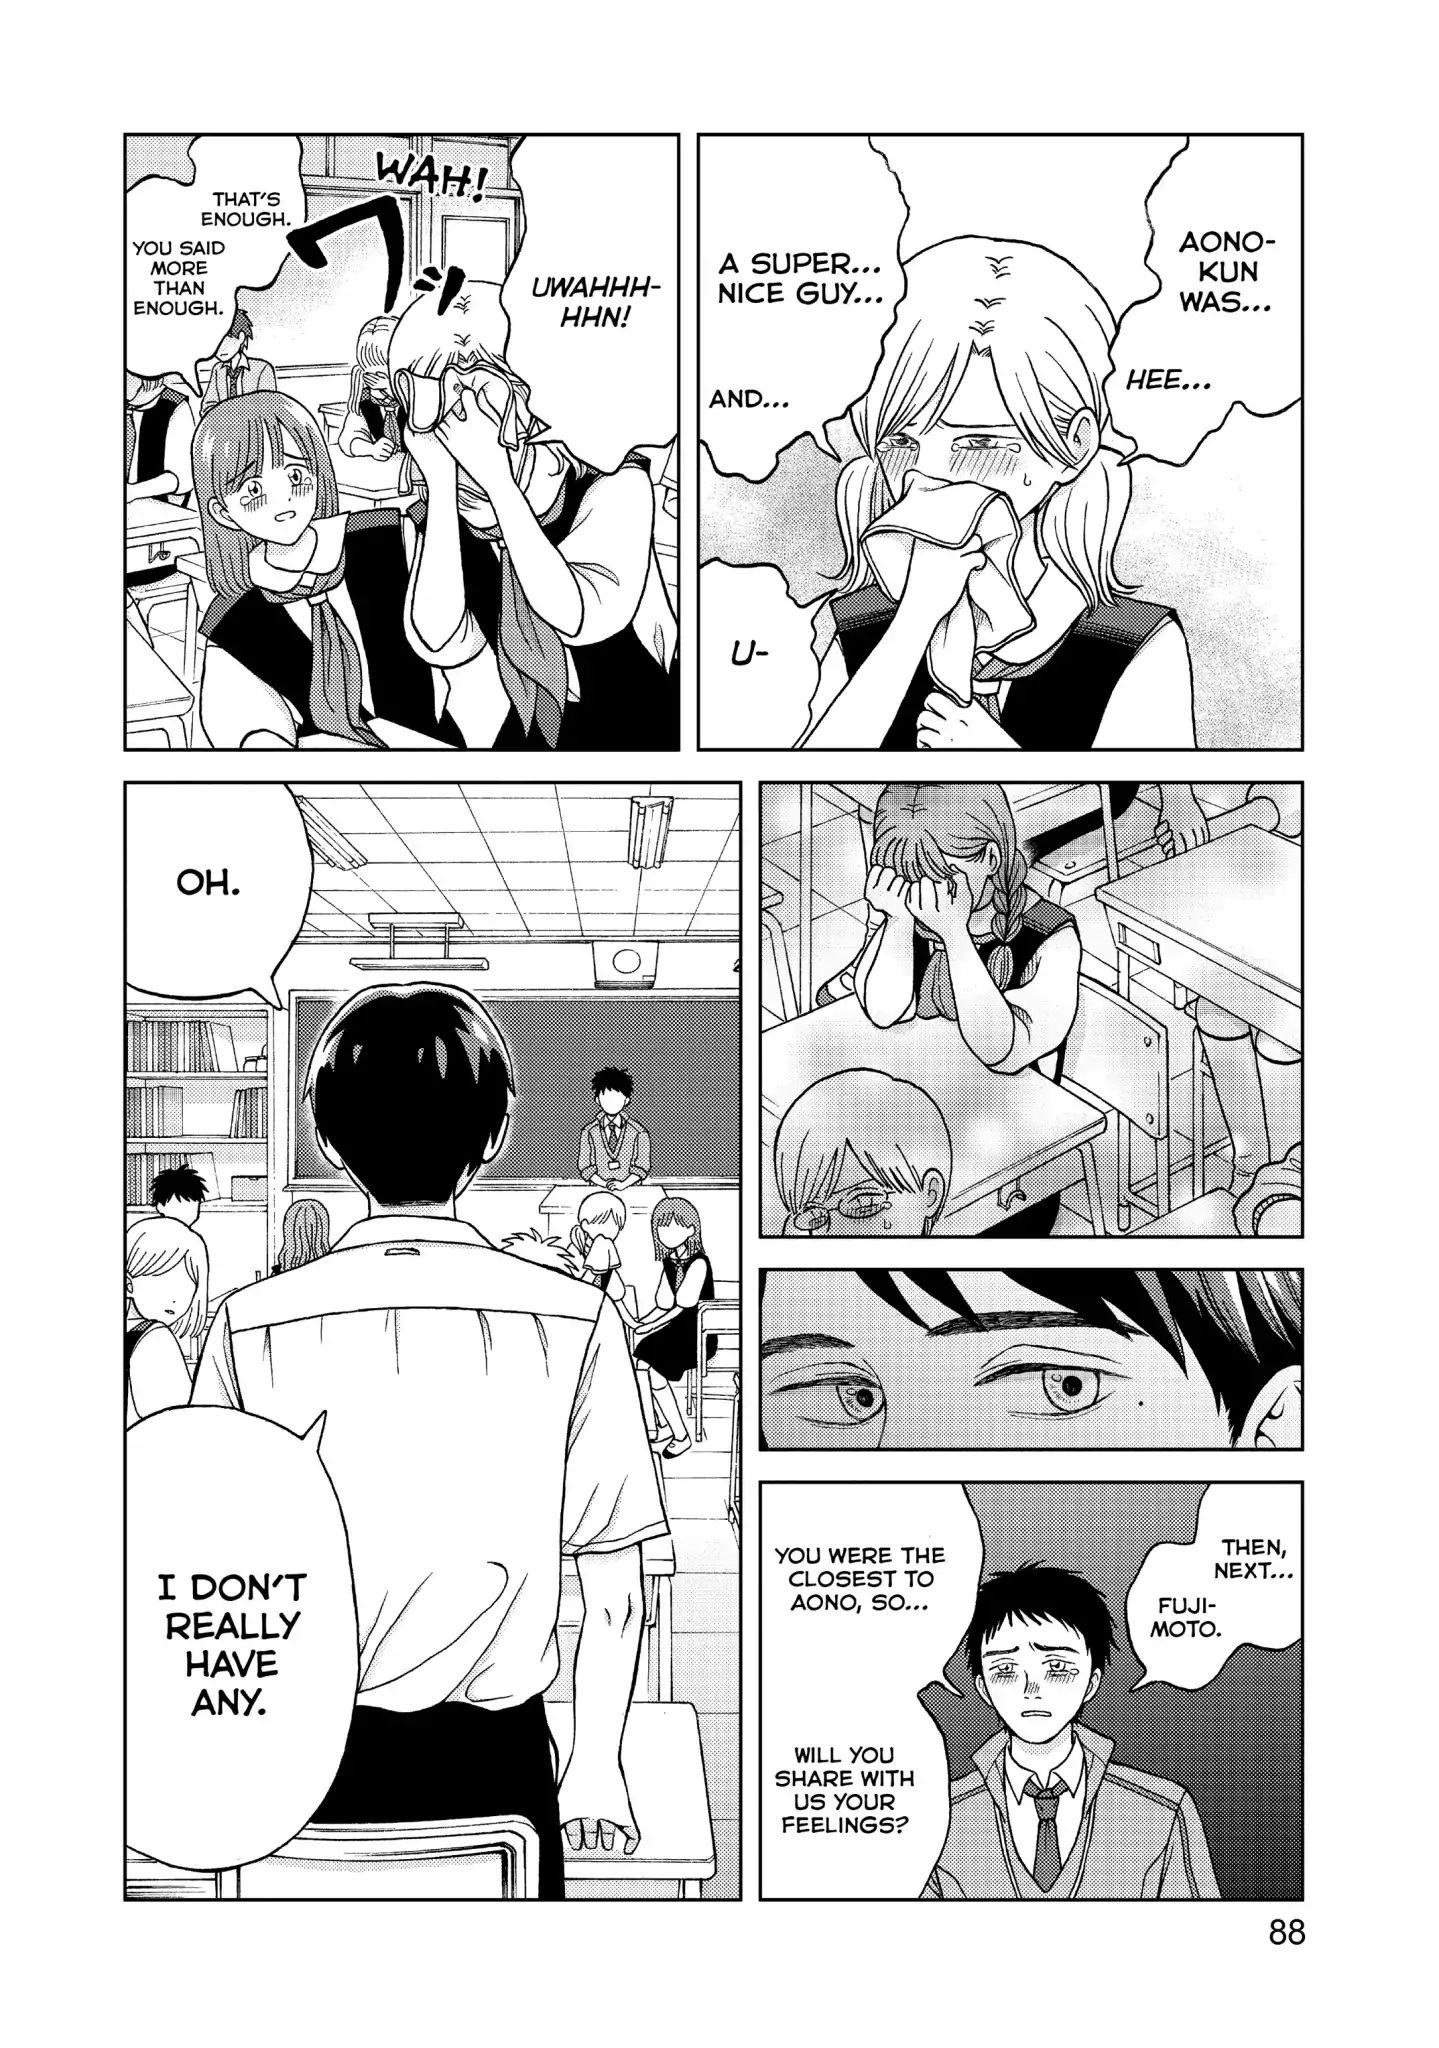 I Want To Hold Aono-Kun So Badly I Could Die Vol.1 Chapter 3: Aono-Kun's Friend - Picture 2